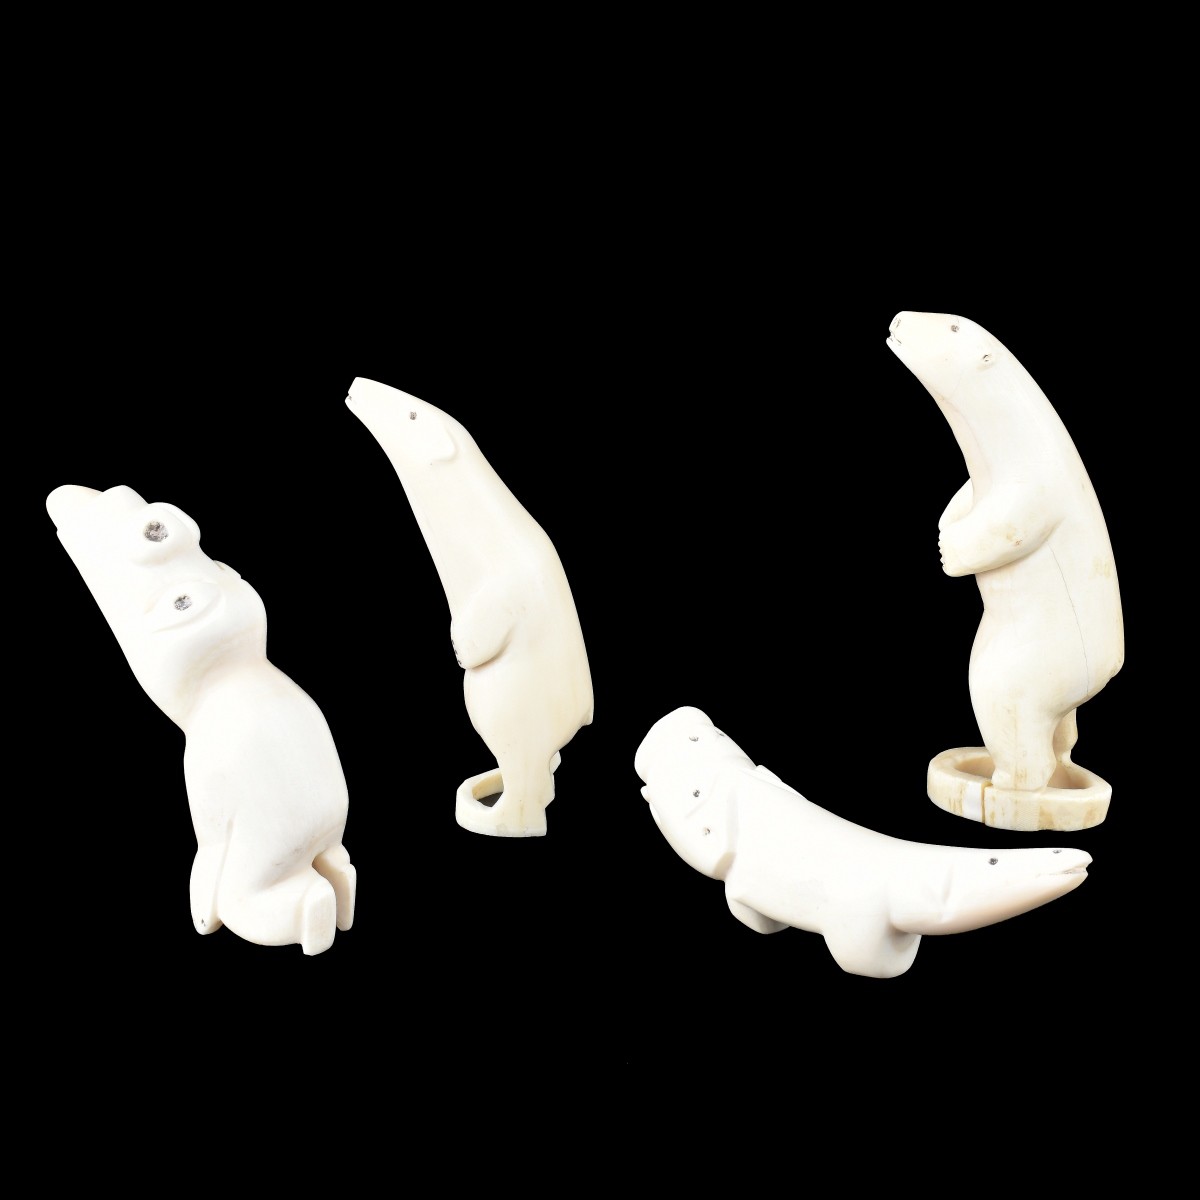 Four Inuit Carved Walrus Ivory Figurines